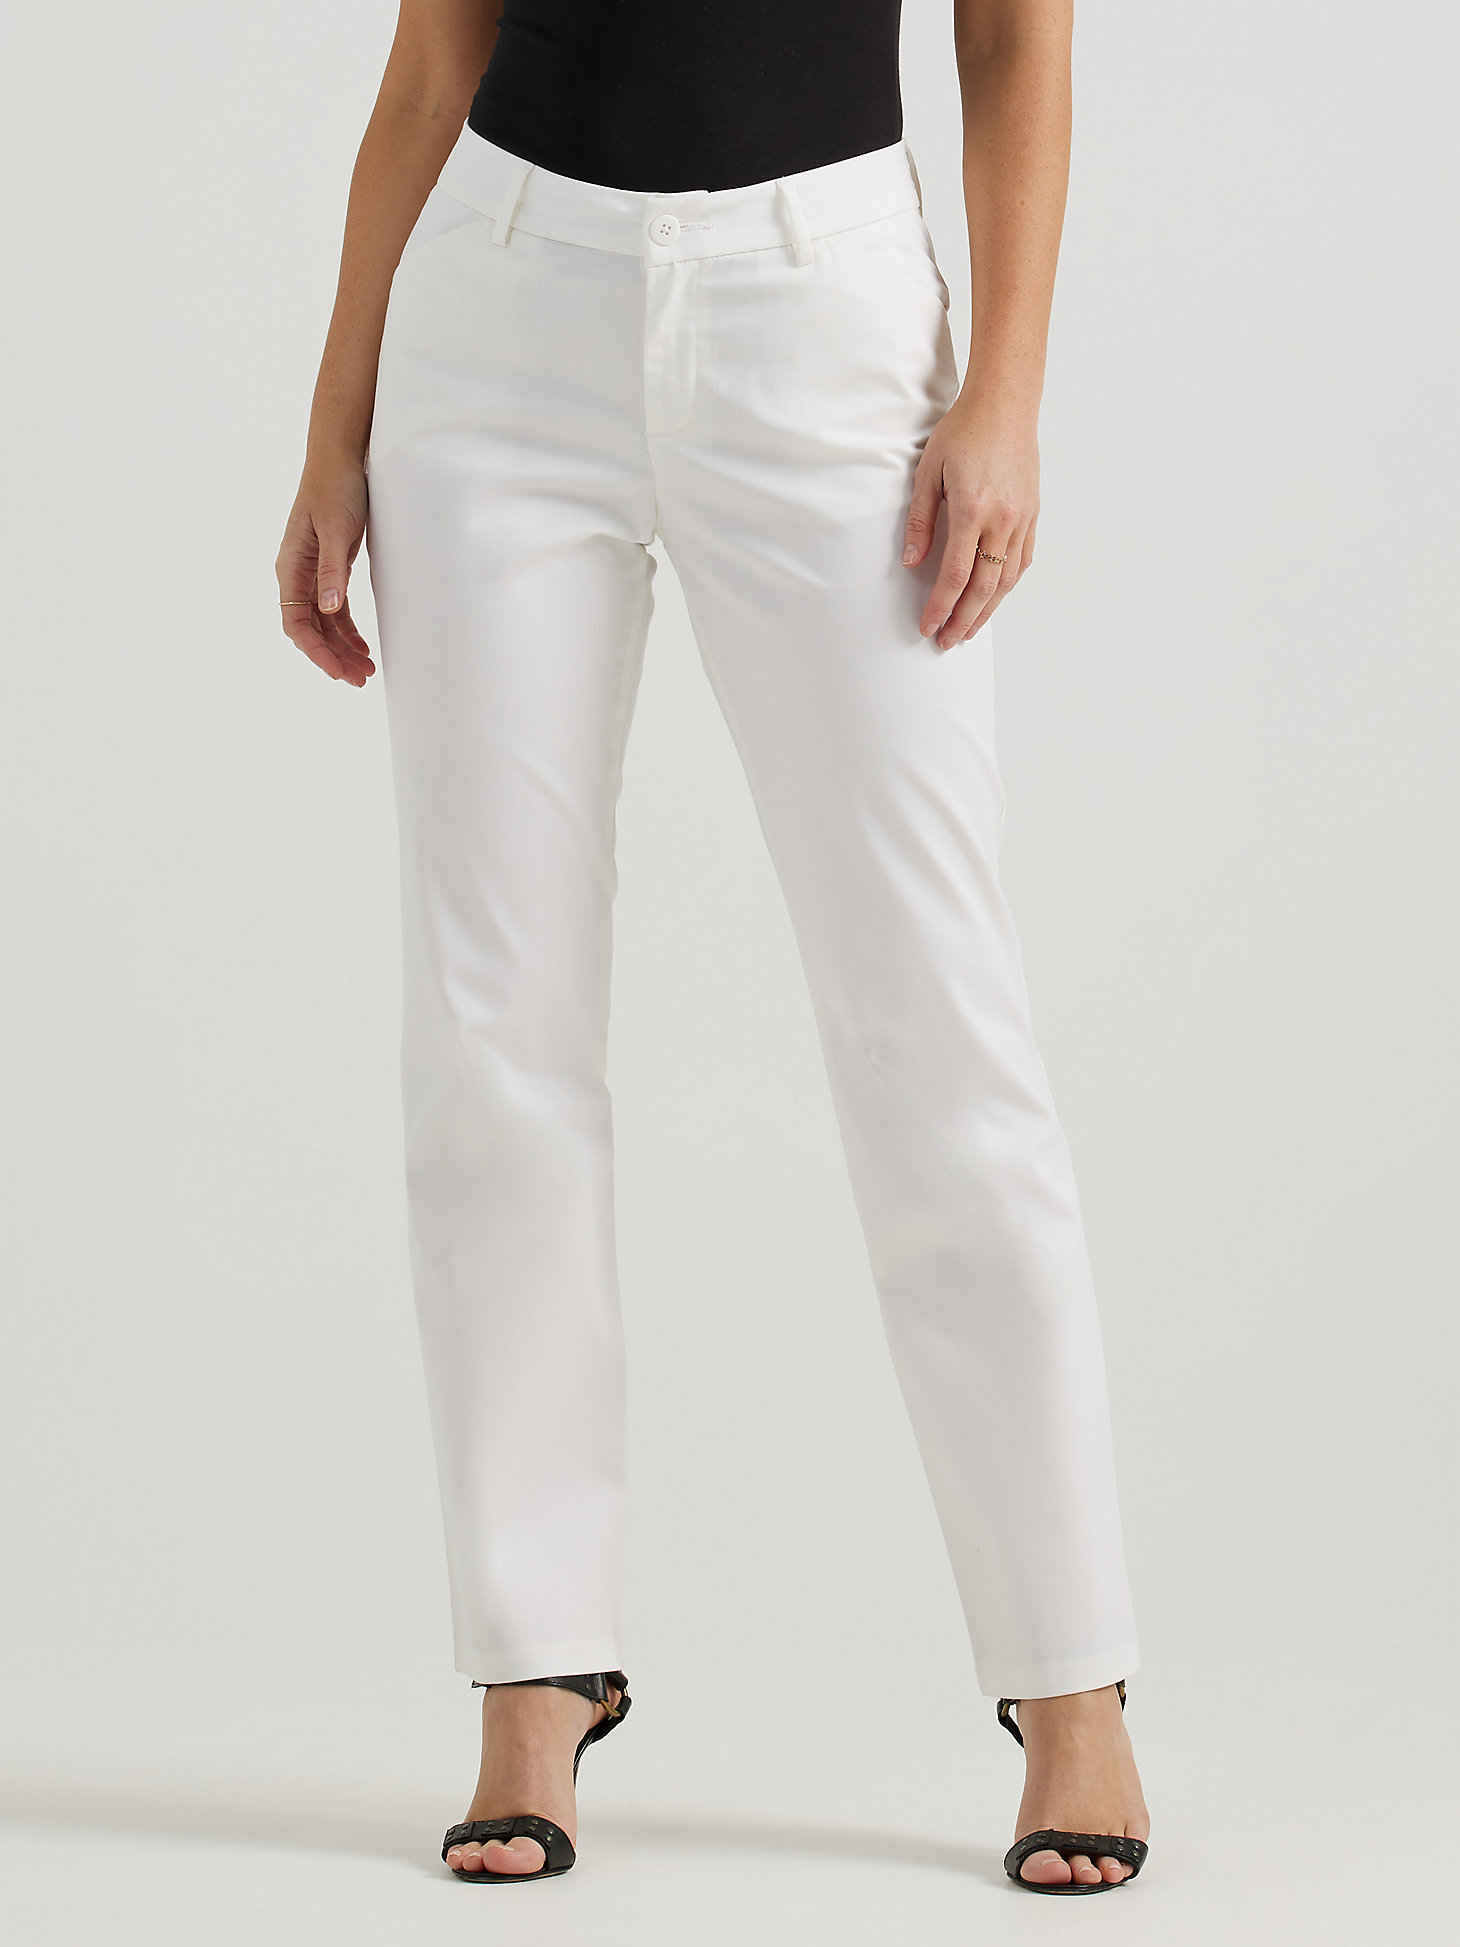 NEW Women's Tapered Stretch Woven Pants - All in Motion™ L-LONG